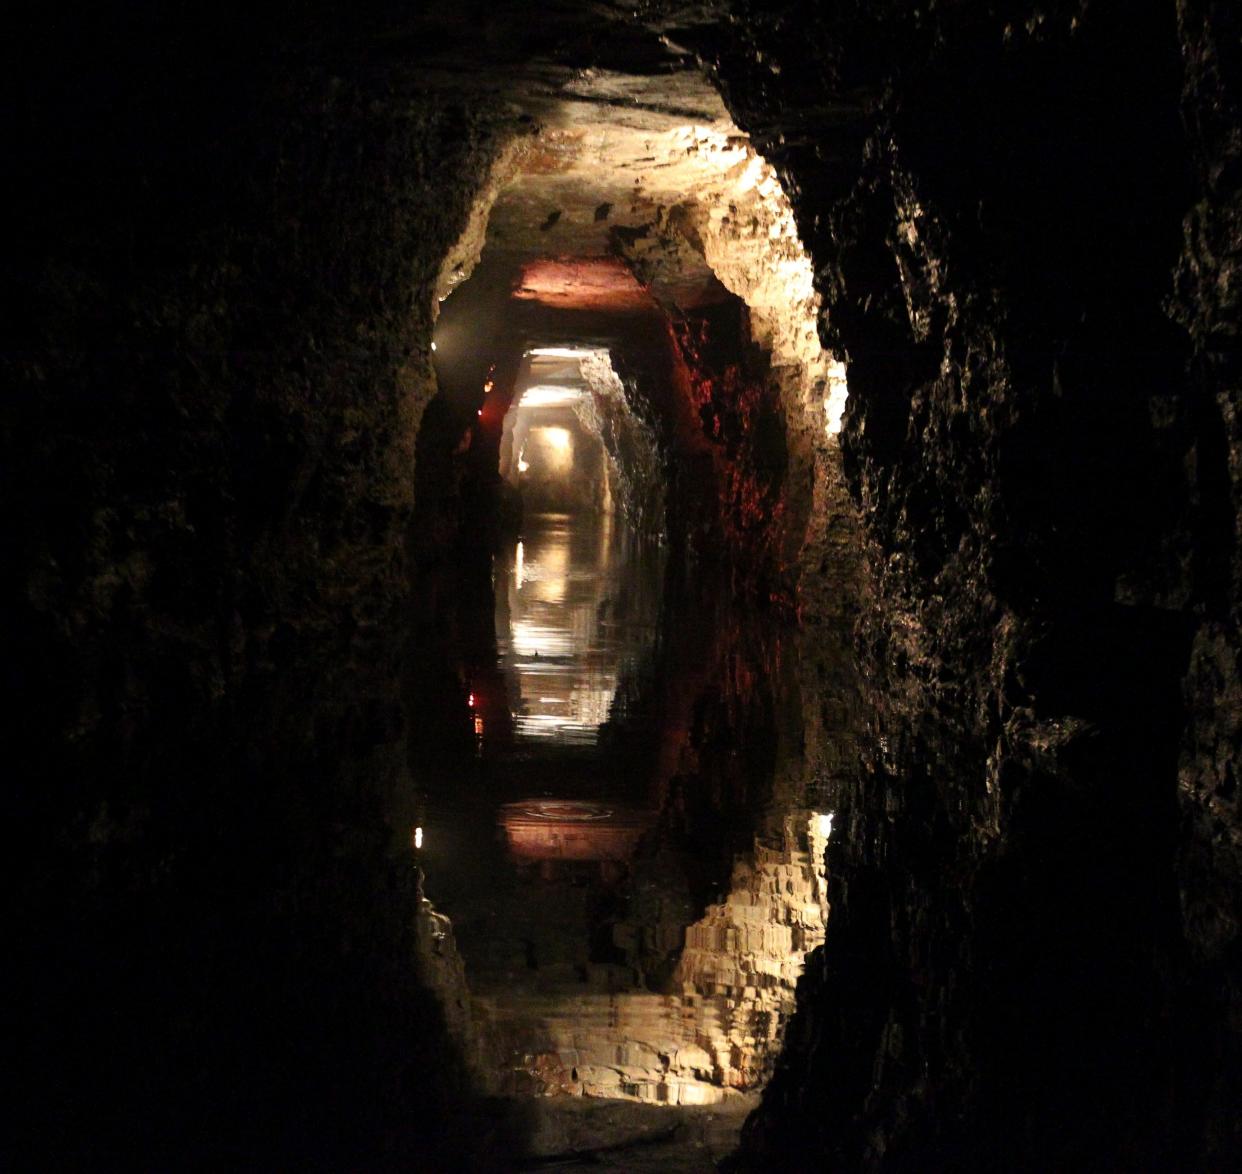 Water reflects the rock of the man-made Lockport Caves in Lockport, N.Y., on Aug. 21, 2014 (2014, BUFFALO NEWS)